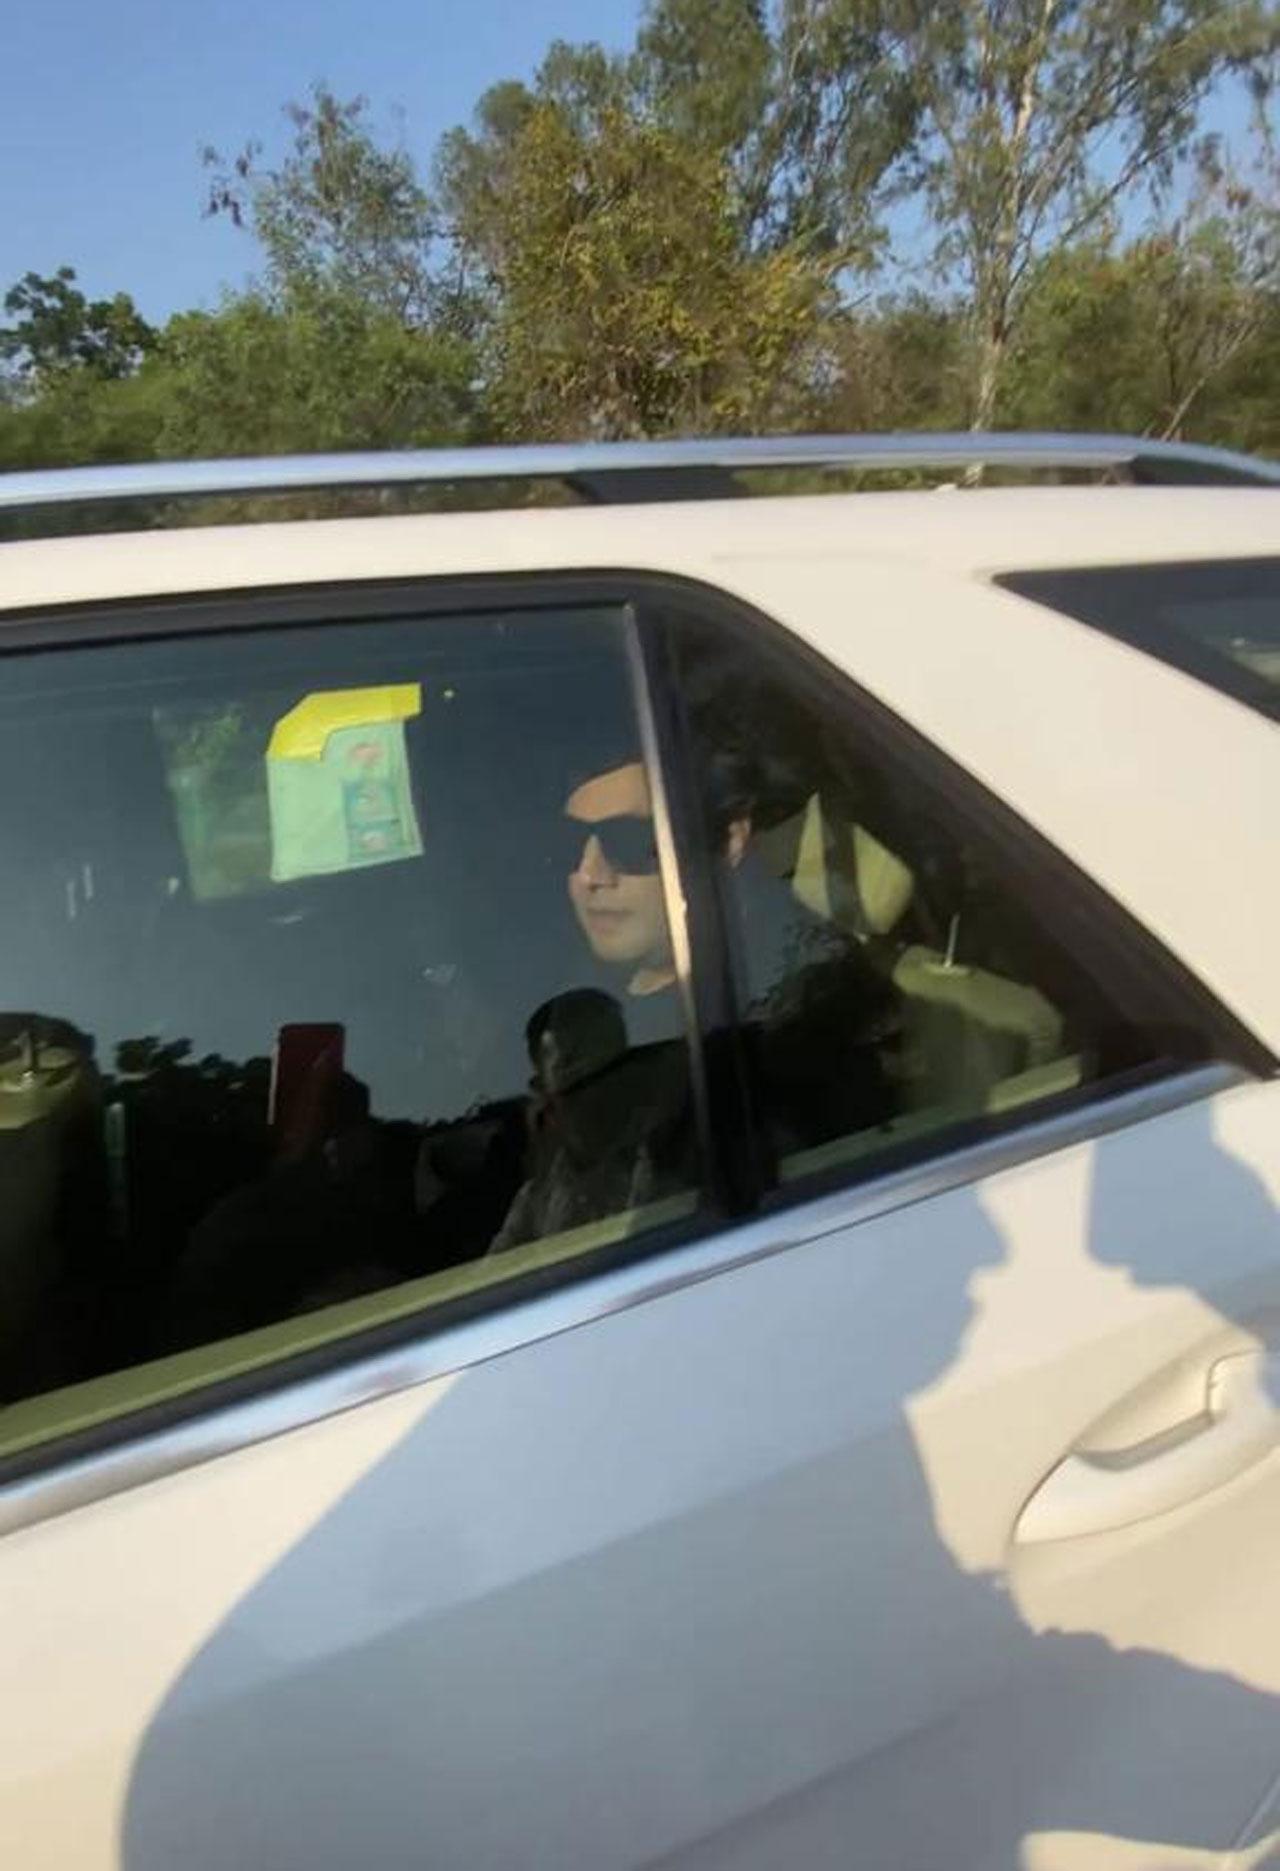 In the same car giving him company was Varun Sharma of Fukrey fame. He’s also known for films like Chhichhore and Roohi.
 